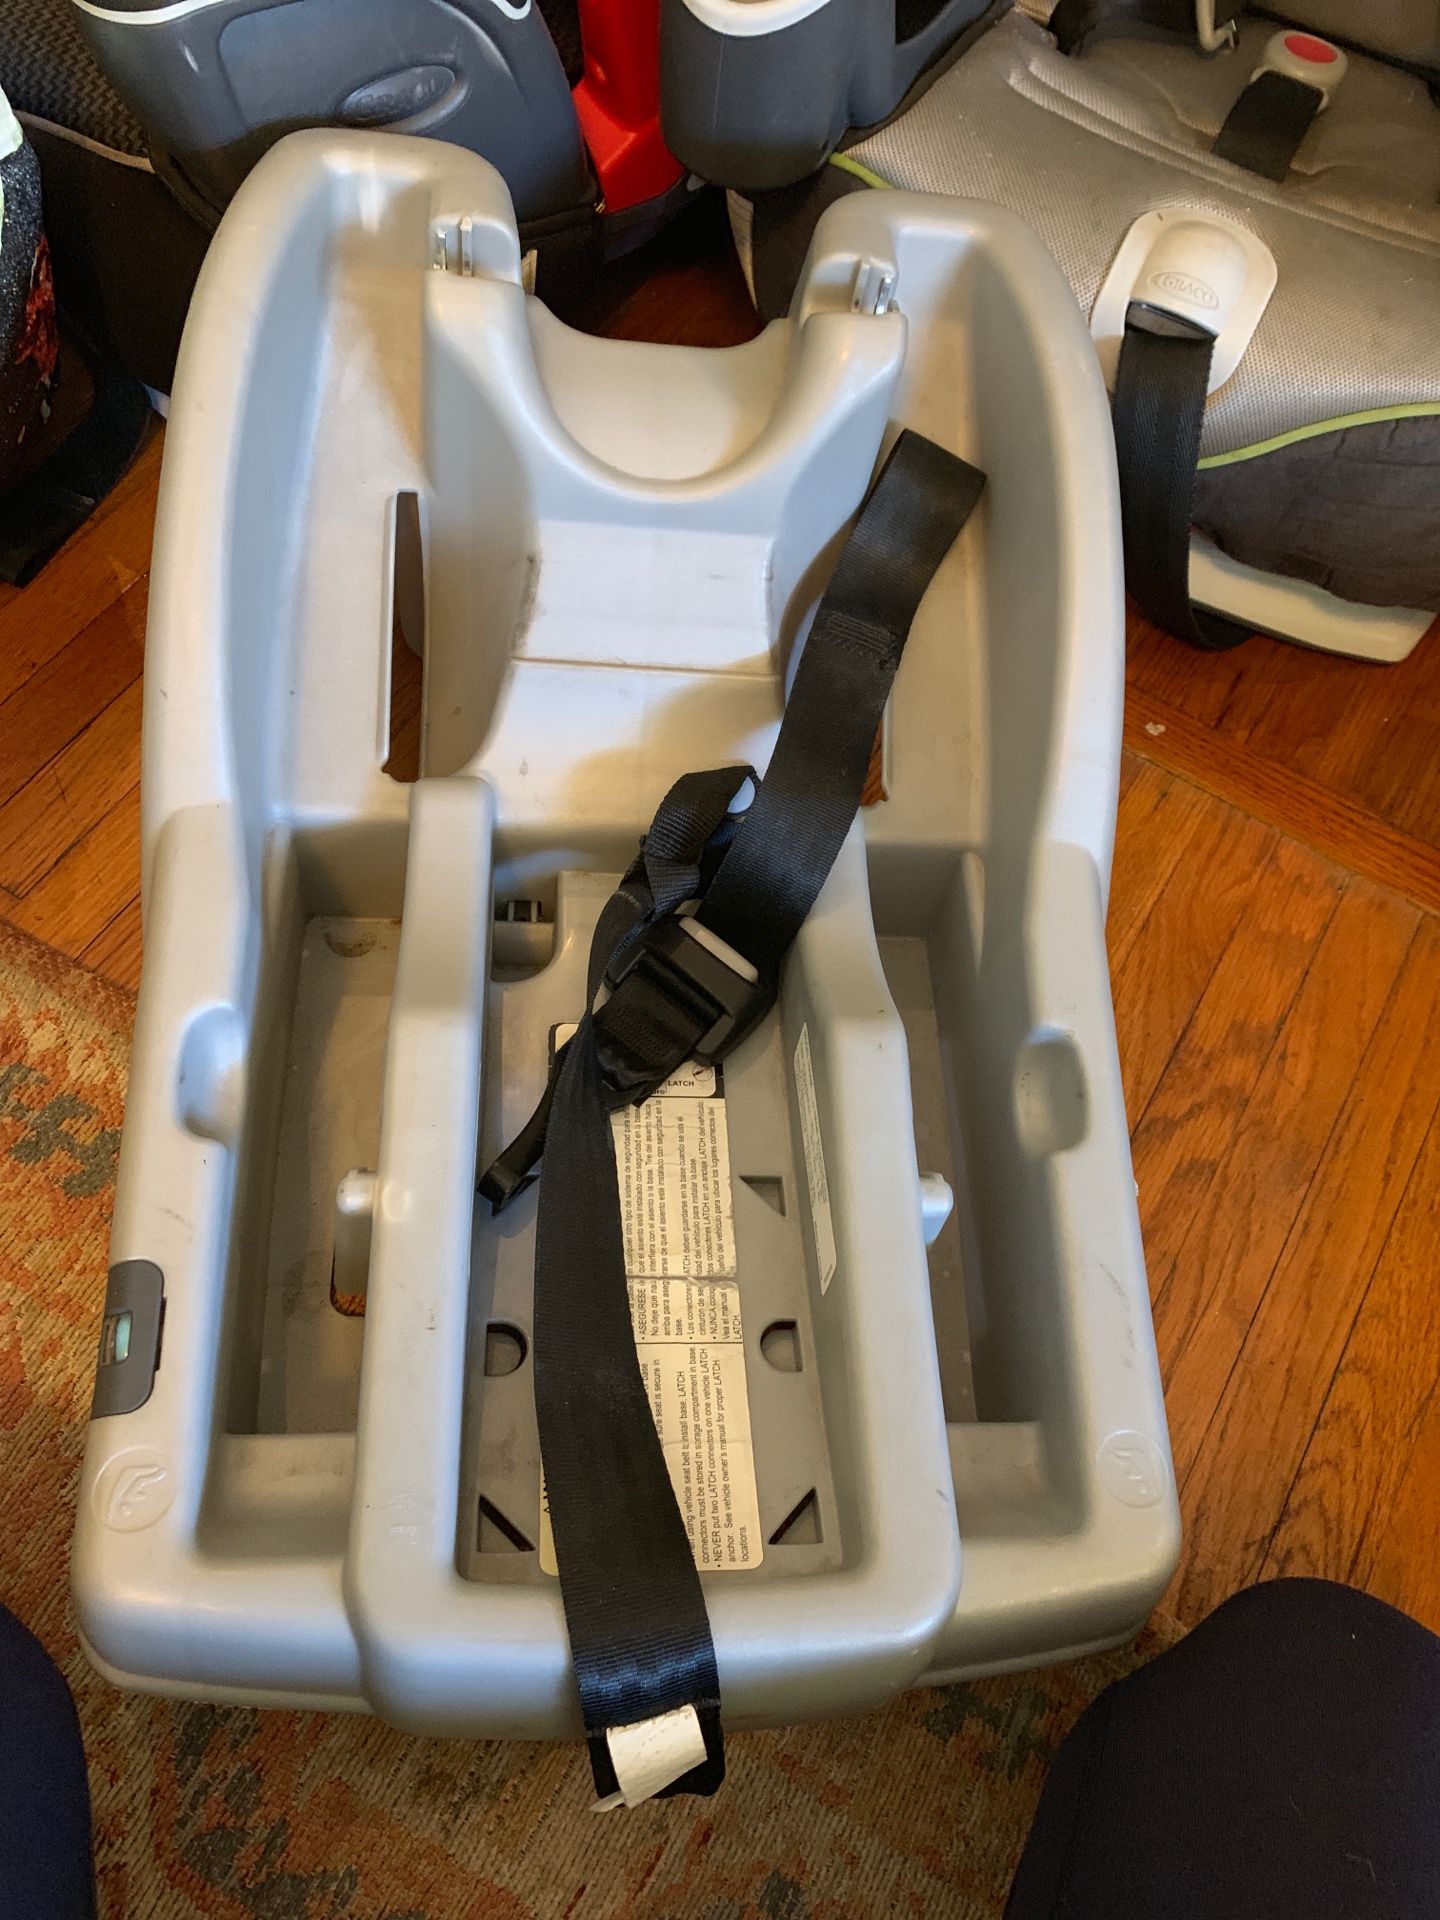 Greco click connect car seat base